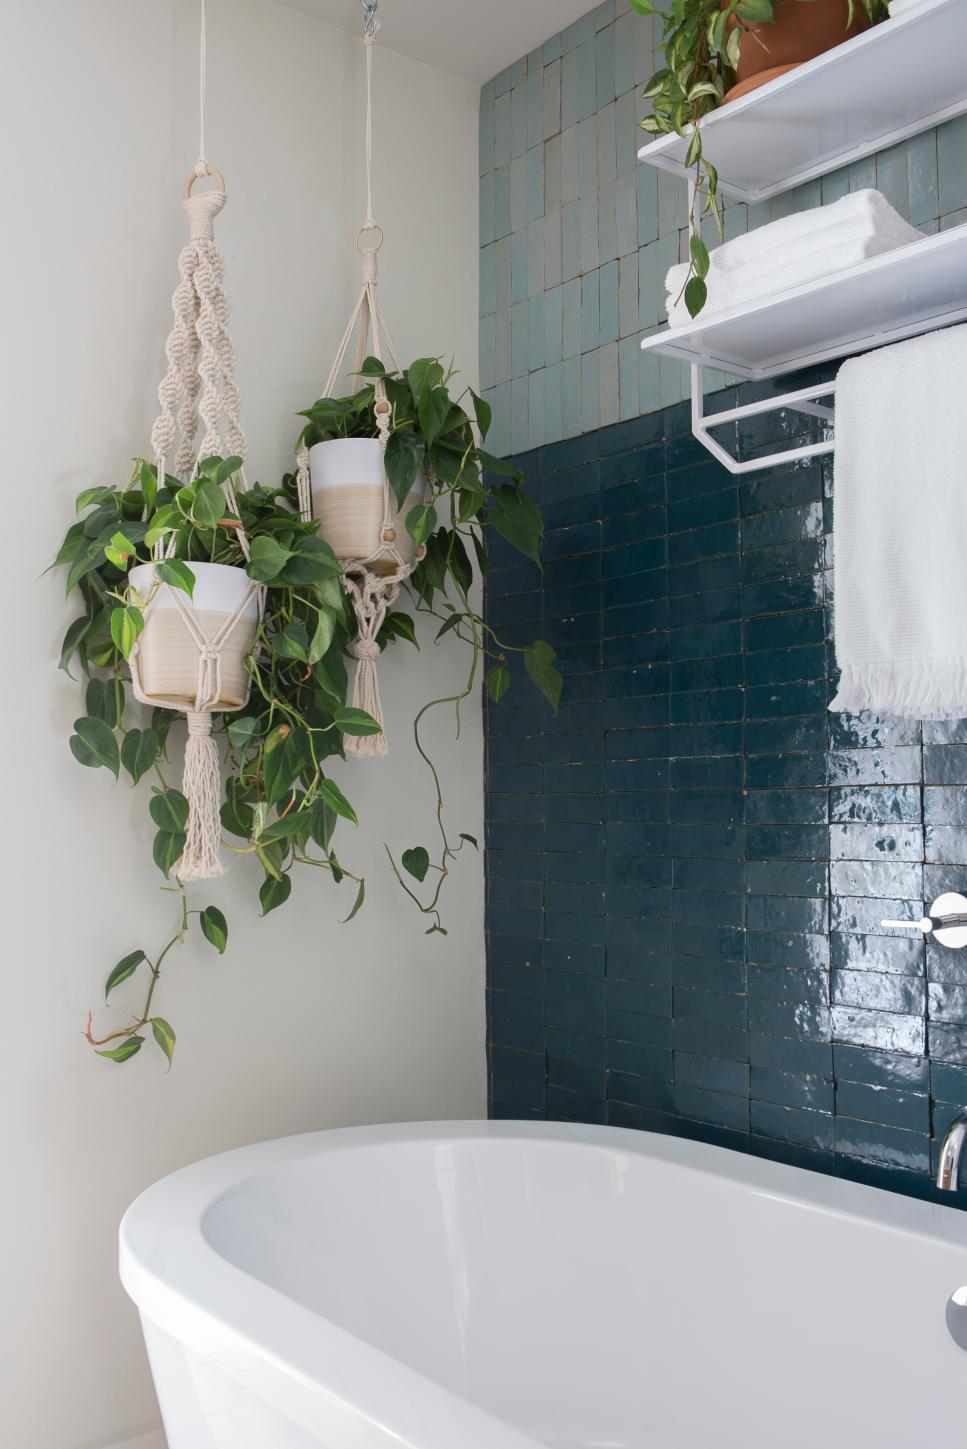 White Midcentury Modern Bathroom with Blue Tile Accent Wall | HGTV